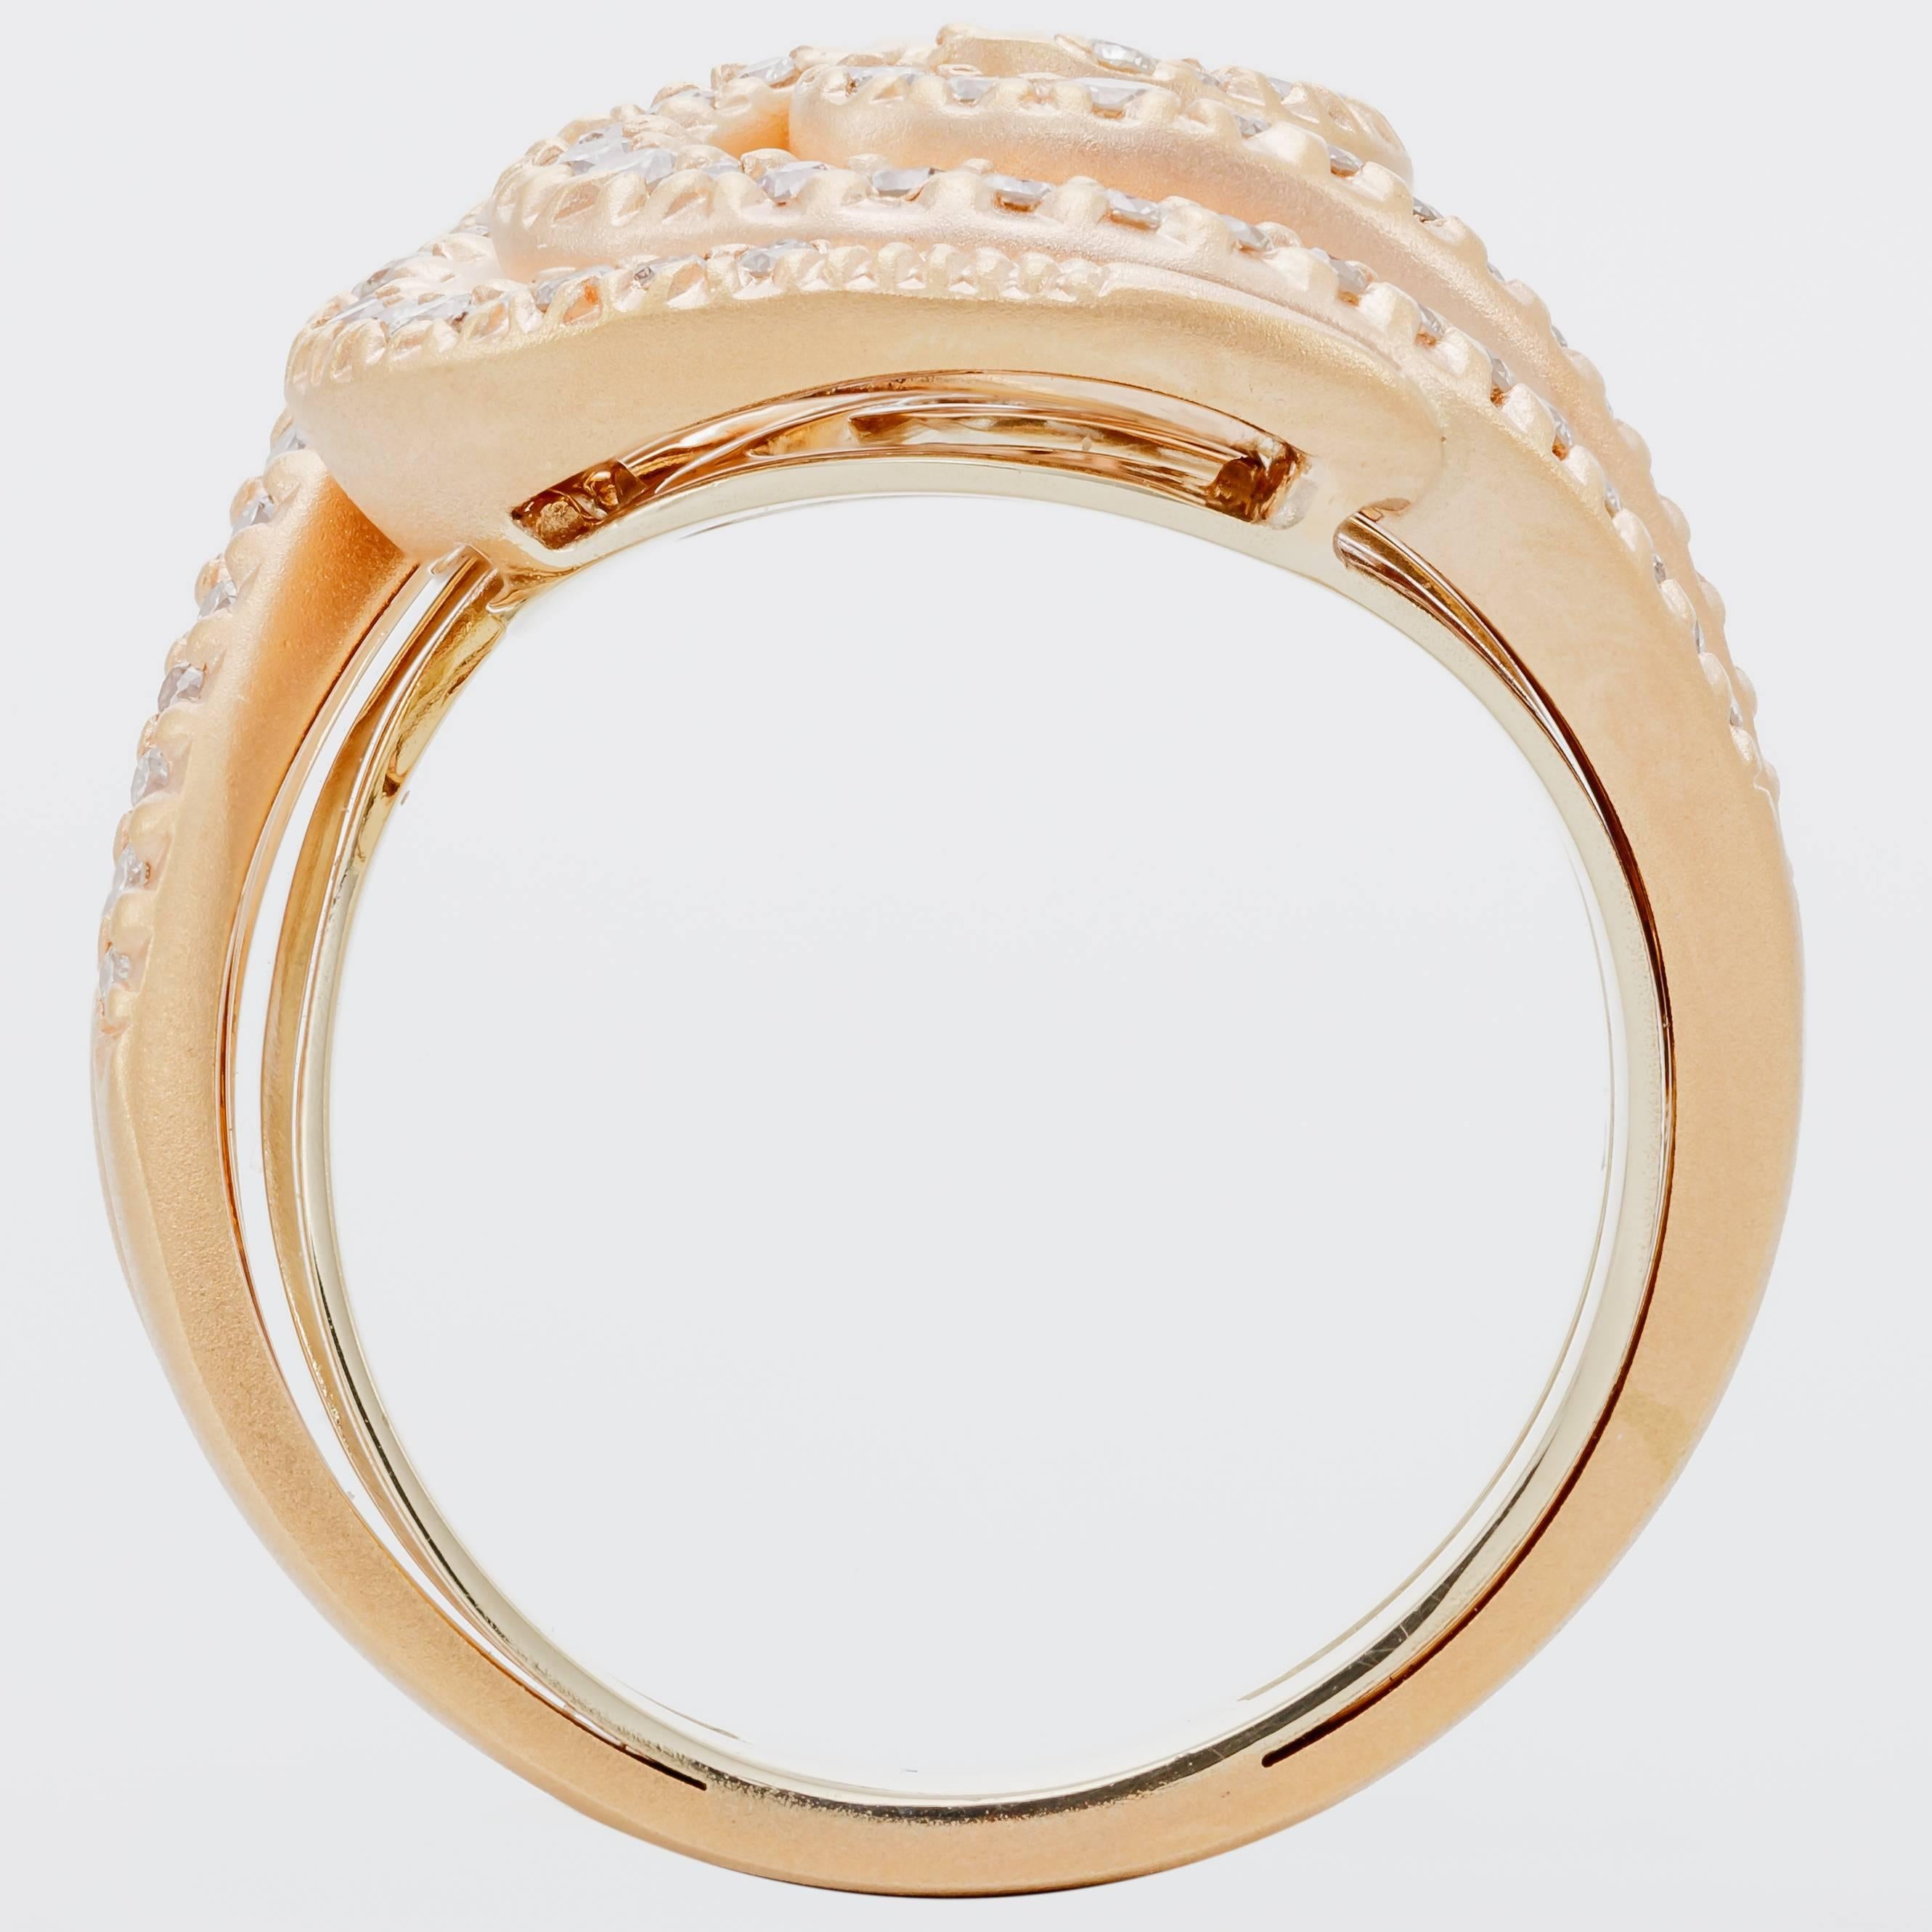 This new H. Stern Iris ring features diamonds totaling 0.76 ct. set in 18K rose gold and noble gold.  Noble gold, H. Stern's signature alloy, has the warmth of yellow gold and elegance of white gold.  The ring is a size 7.  It measures 1 inch tall,